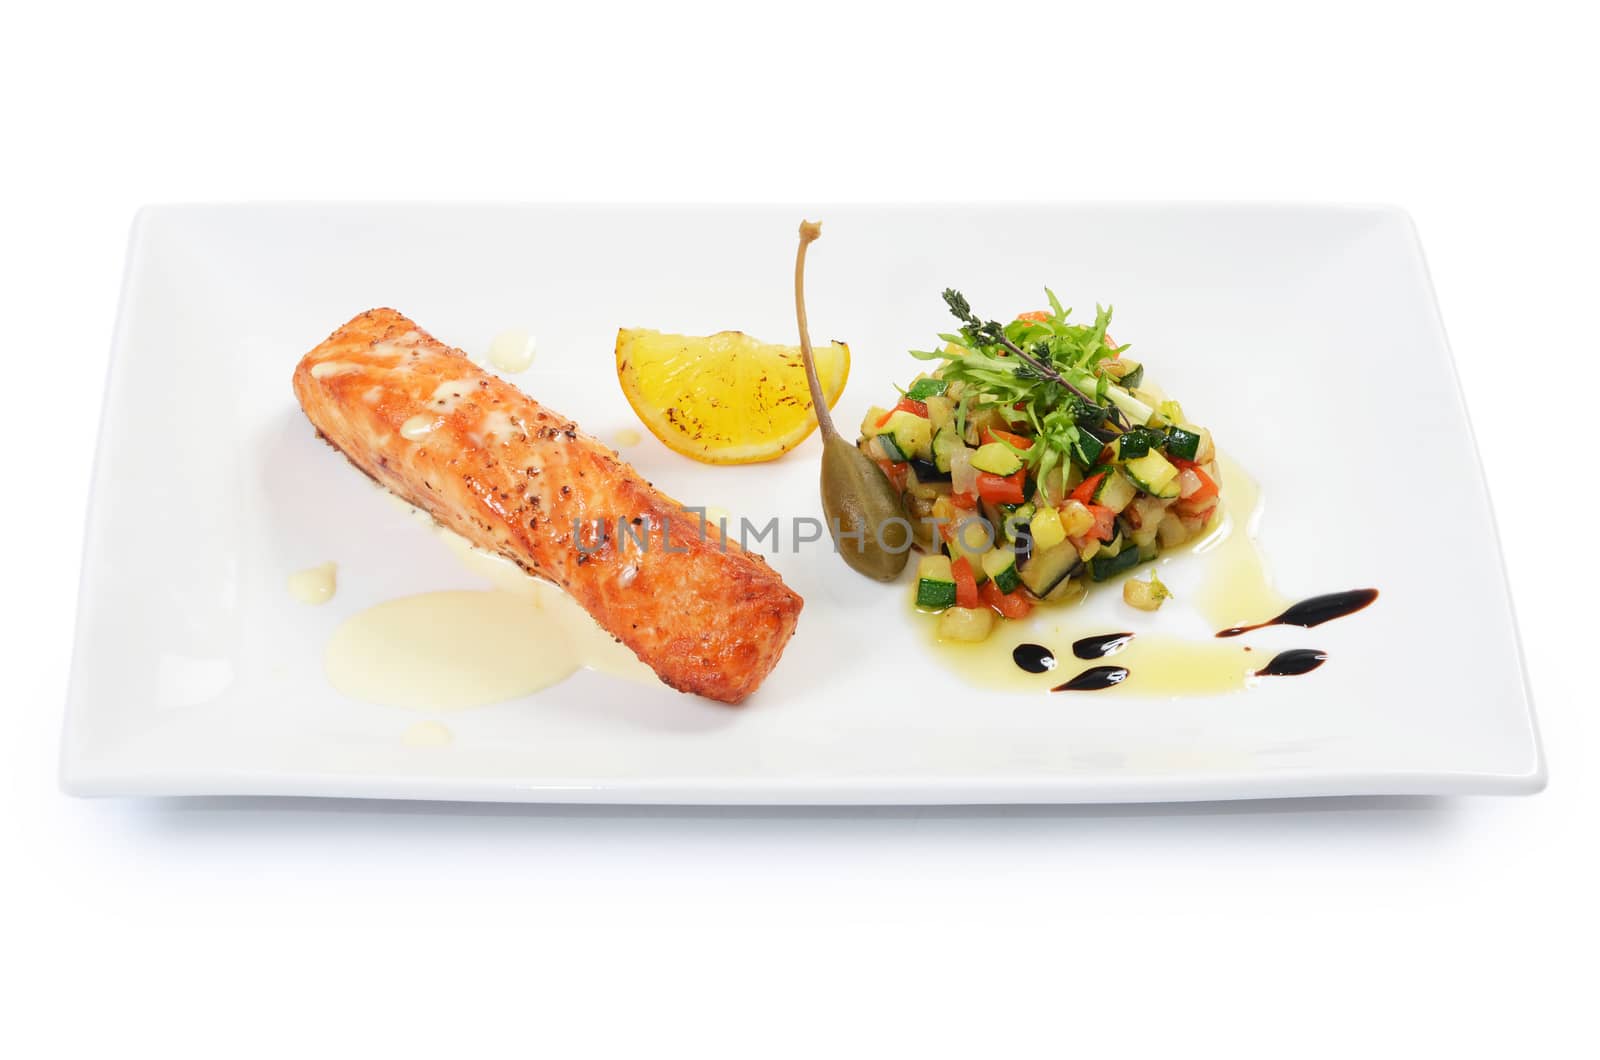 The salmon fillet with vegetable ratatouille isolated